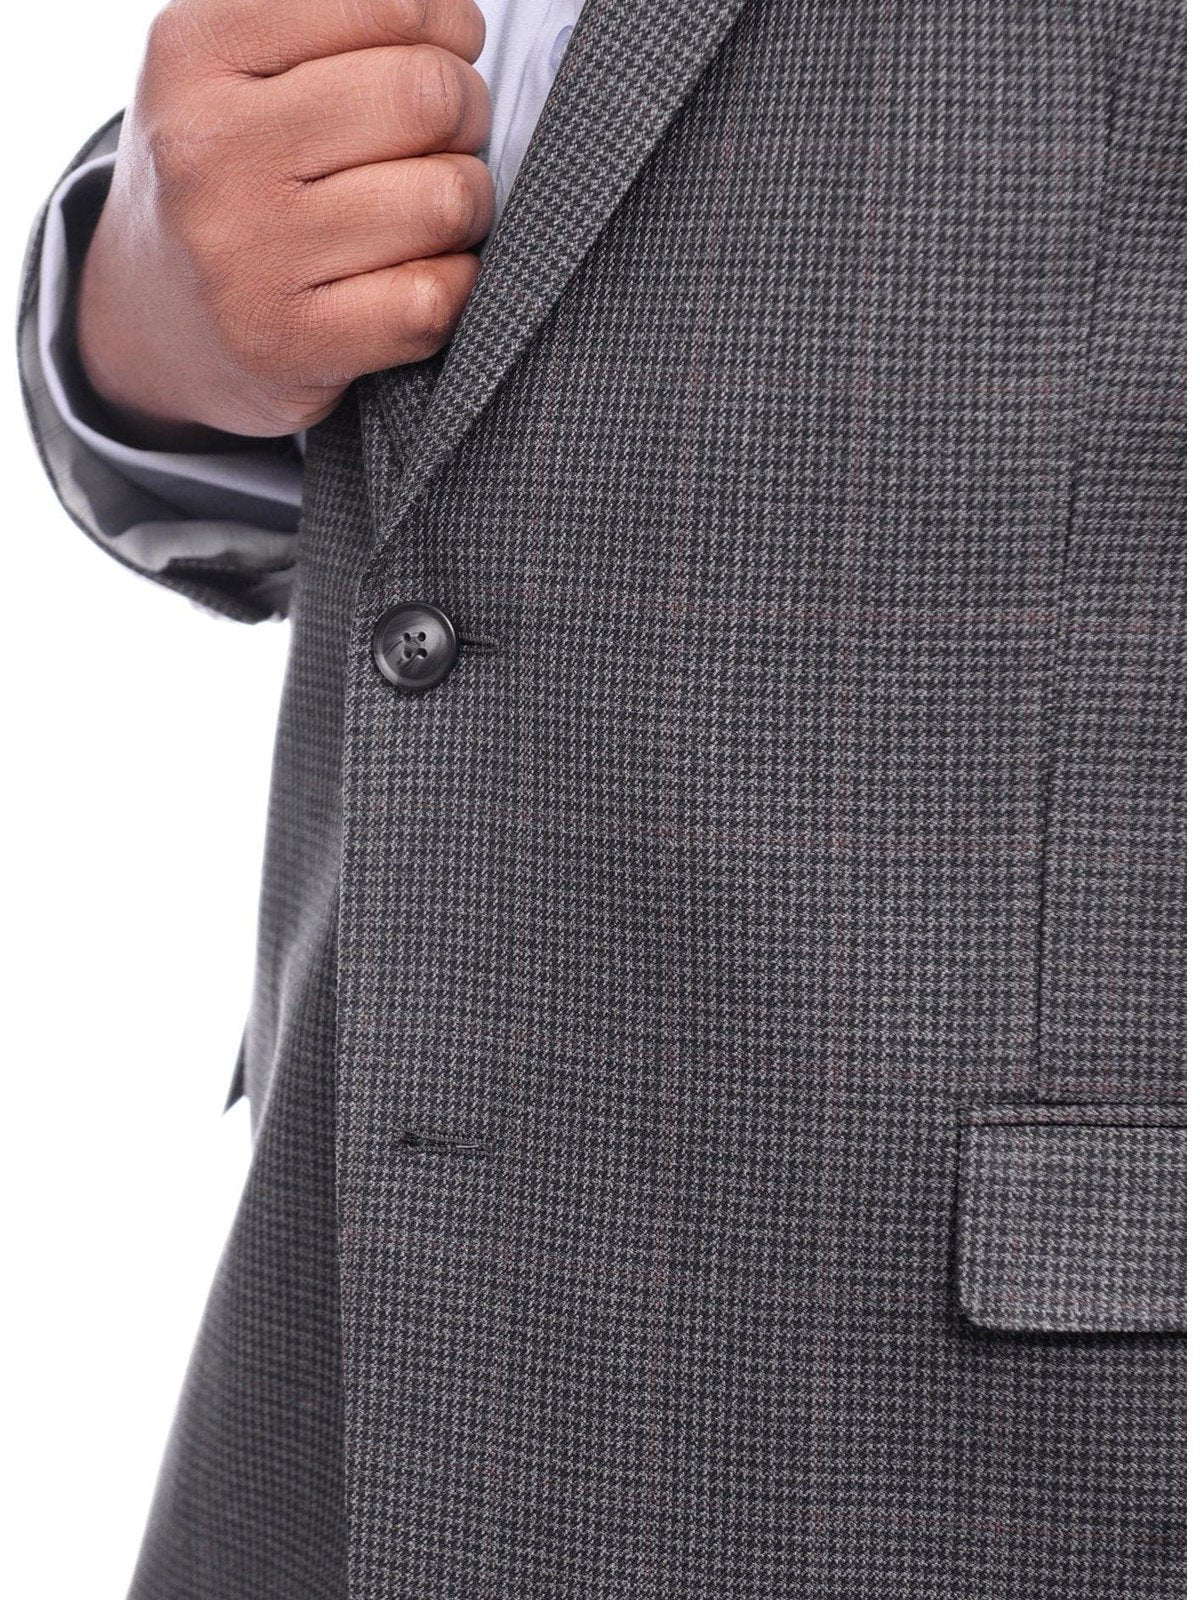 I Uomo Men's Classic Fit Gray Houndstooth Two Button Wool Blazer Sportcoat - The Suit Depot